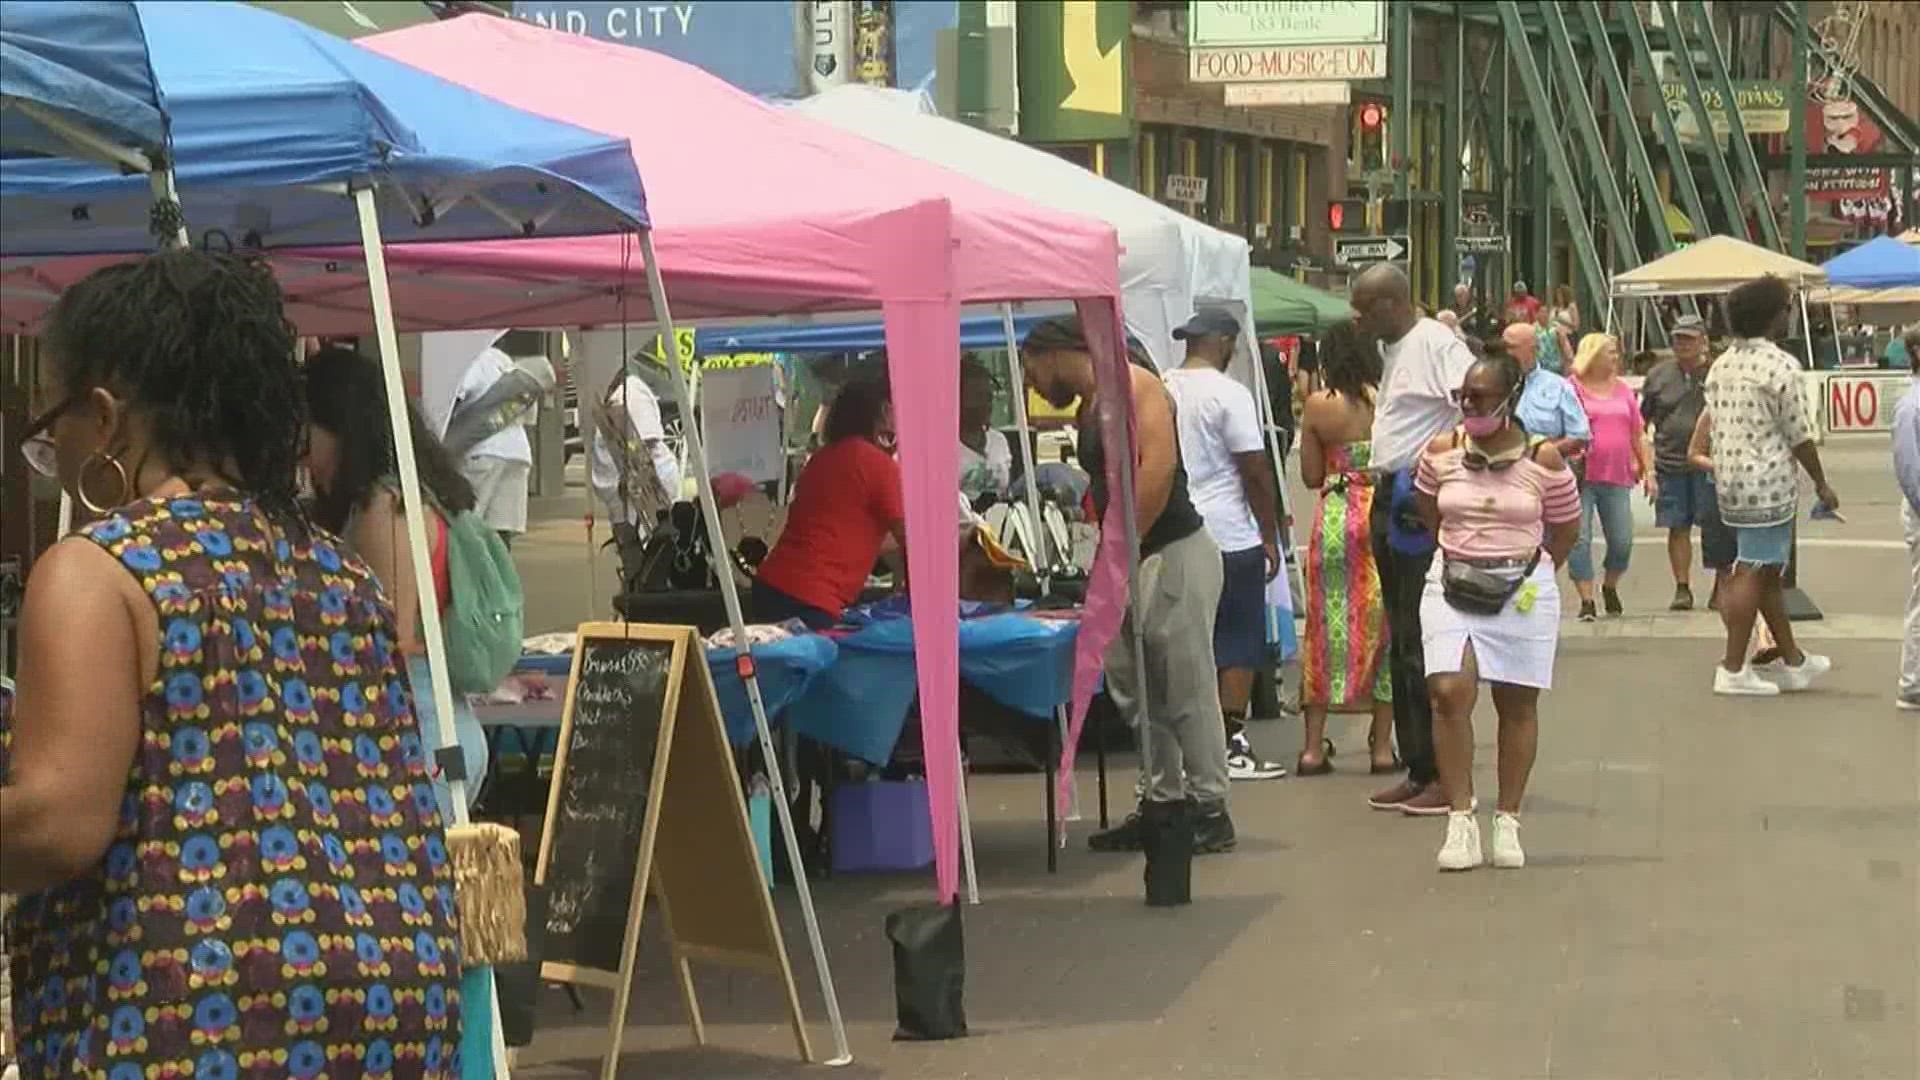 The need for more local support in the Memphis art scene prompted an event to feature work right on Beale Street. The "Artcrawl" has helped local artists since 2018.